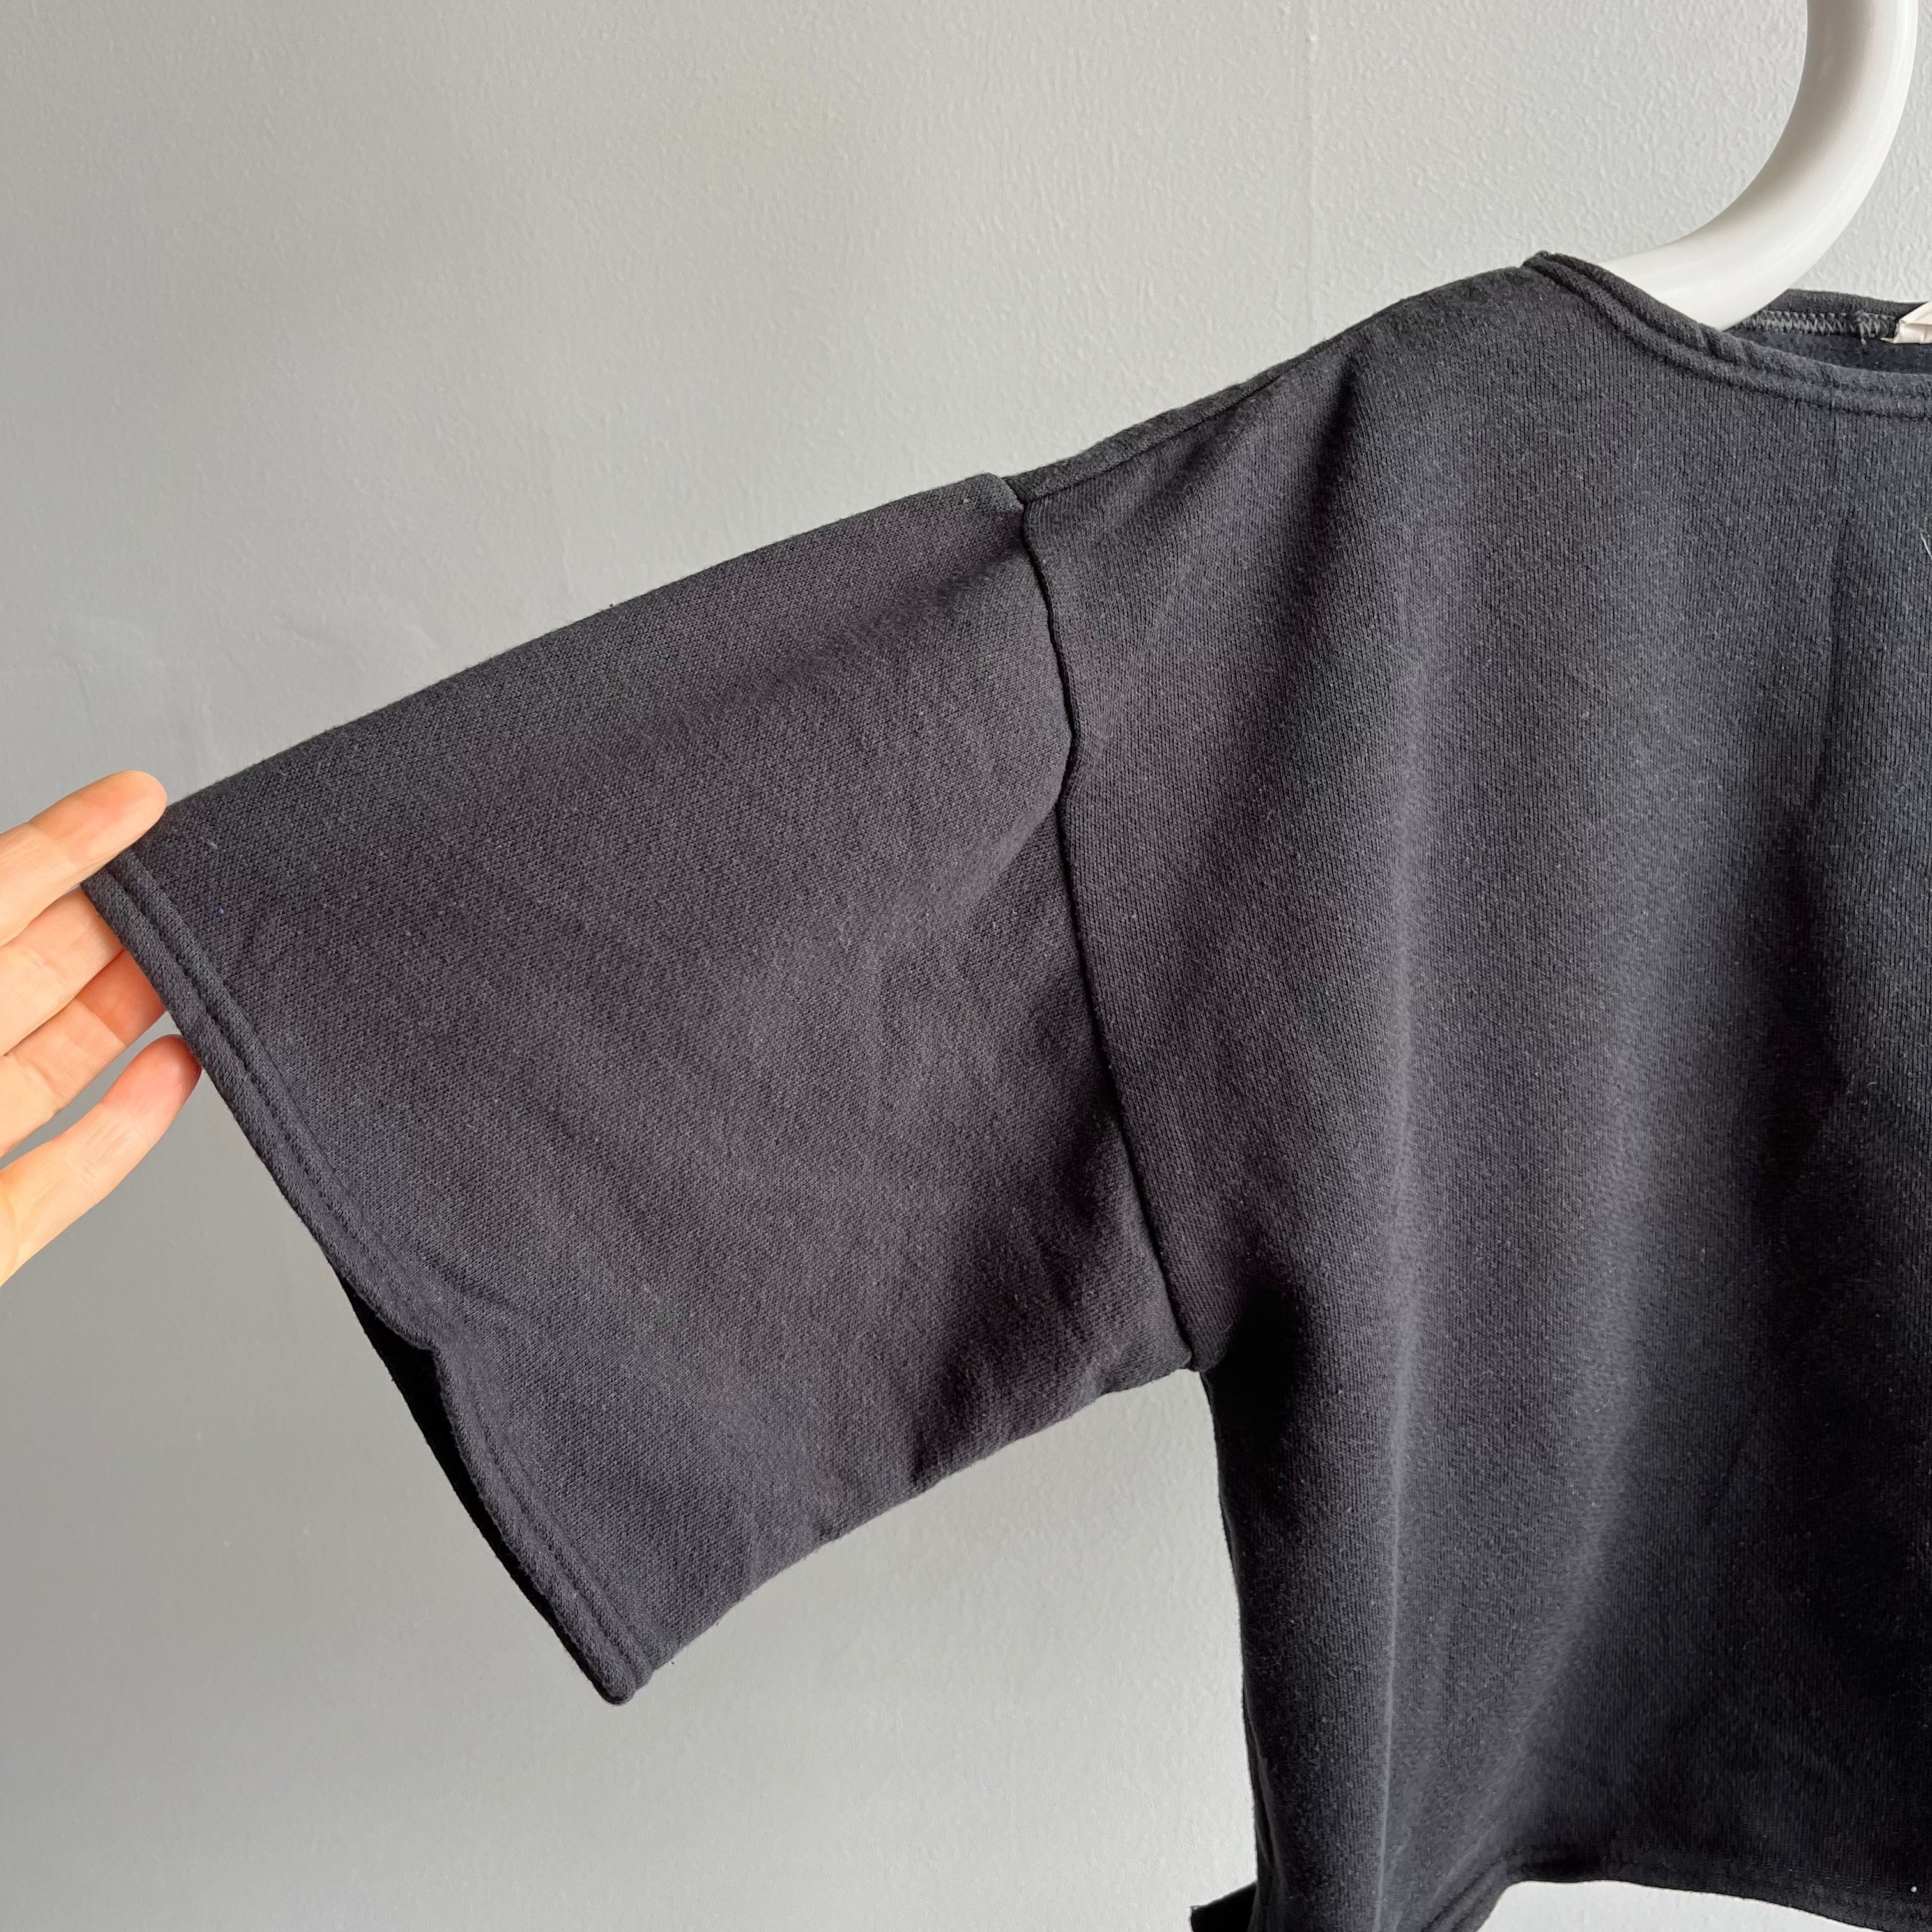 1980s Boxy Blank Black Warm Up Crop Top - YES!